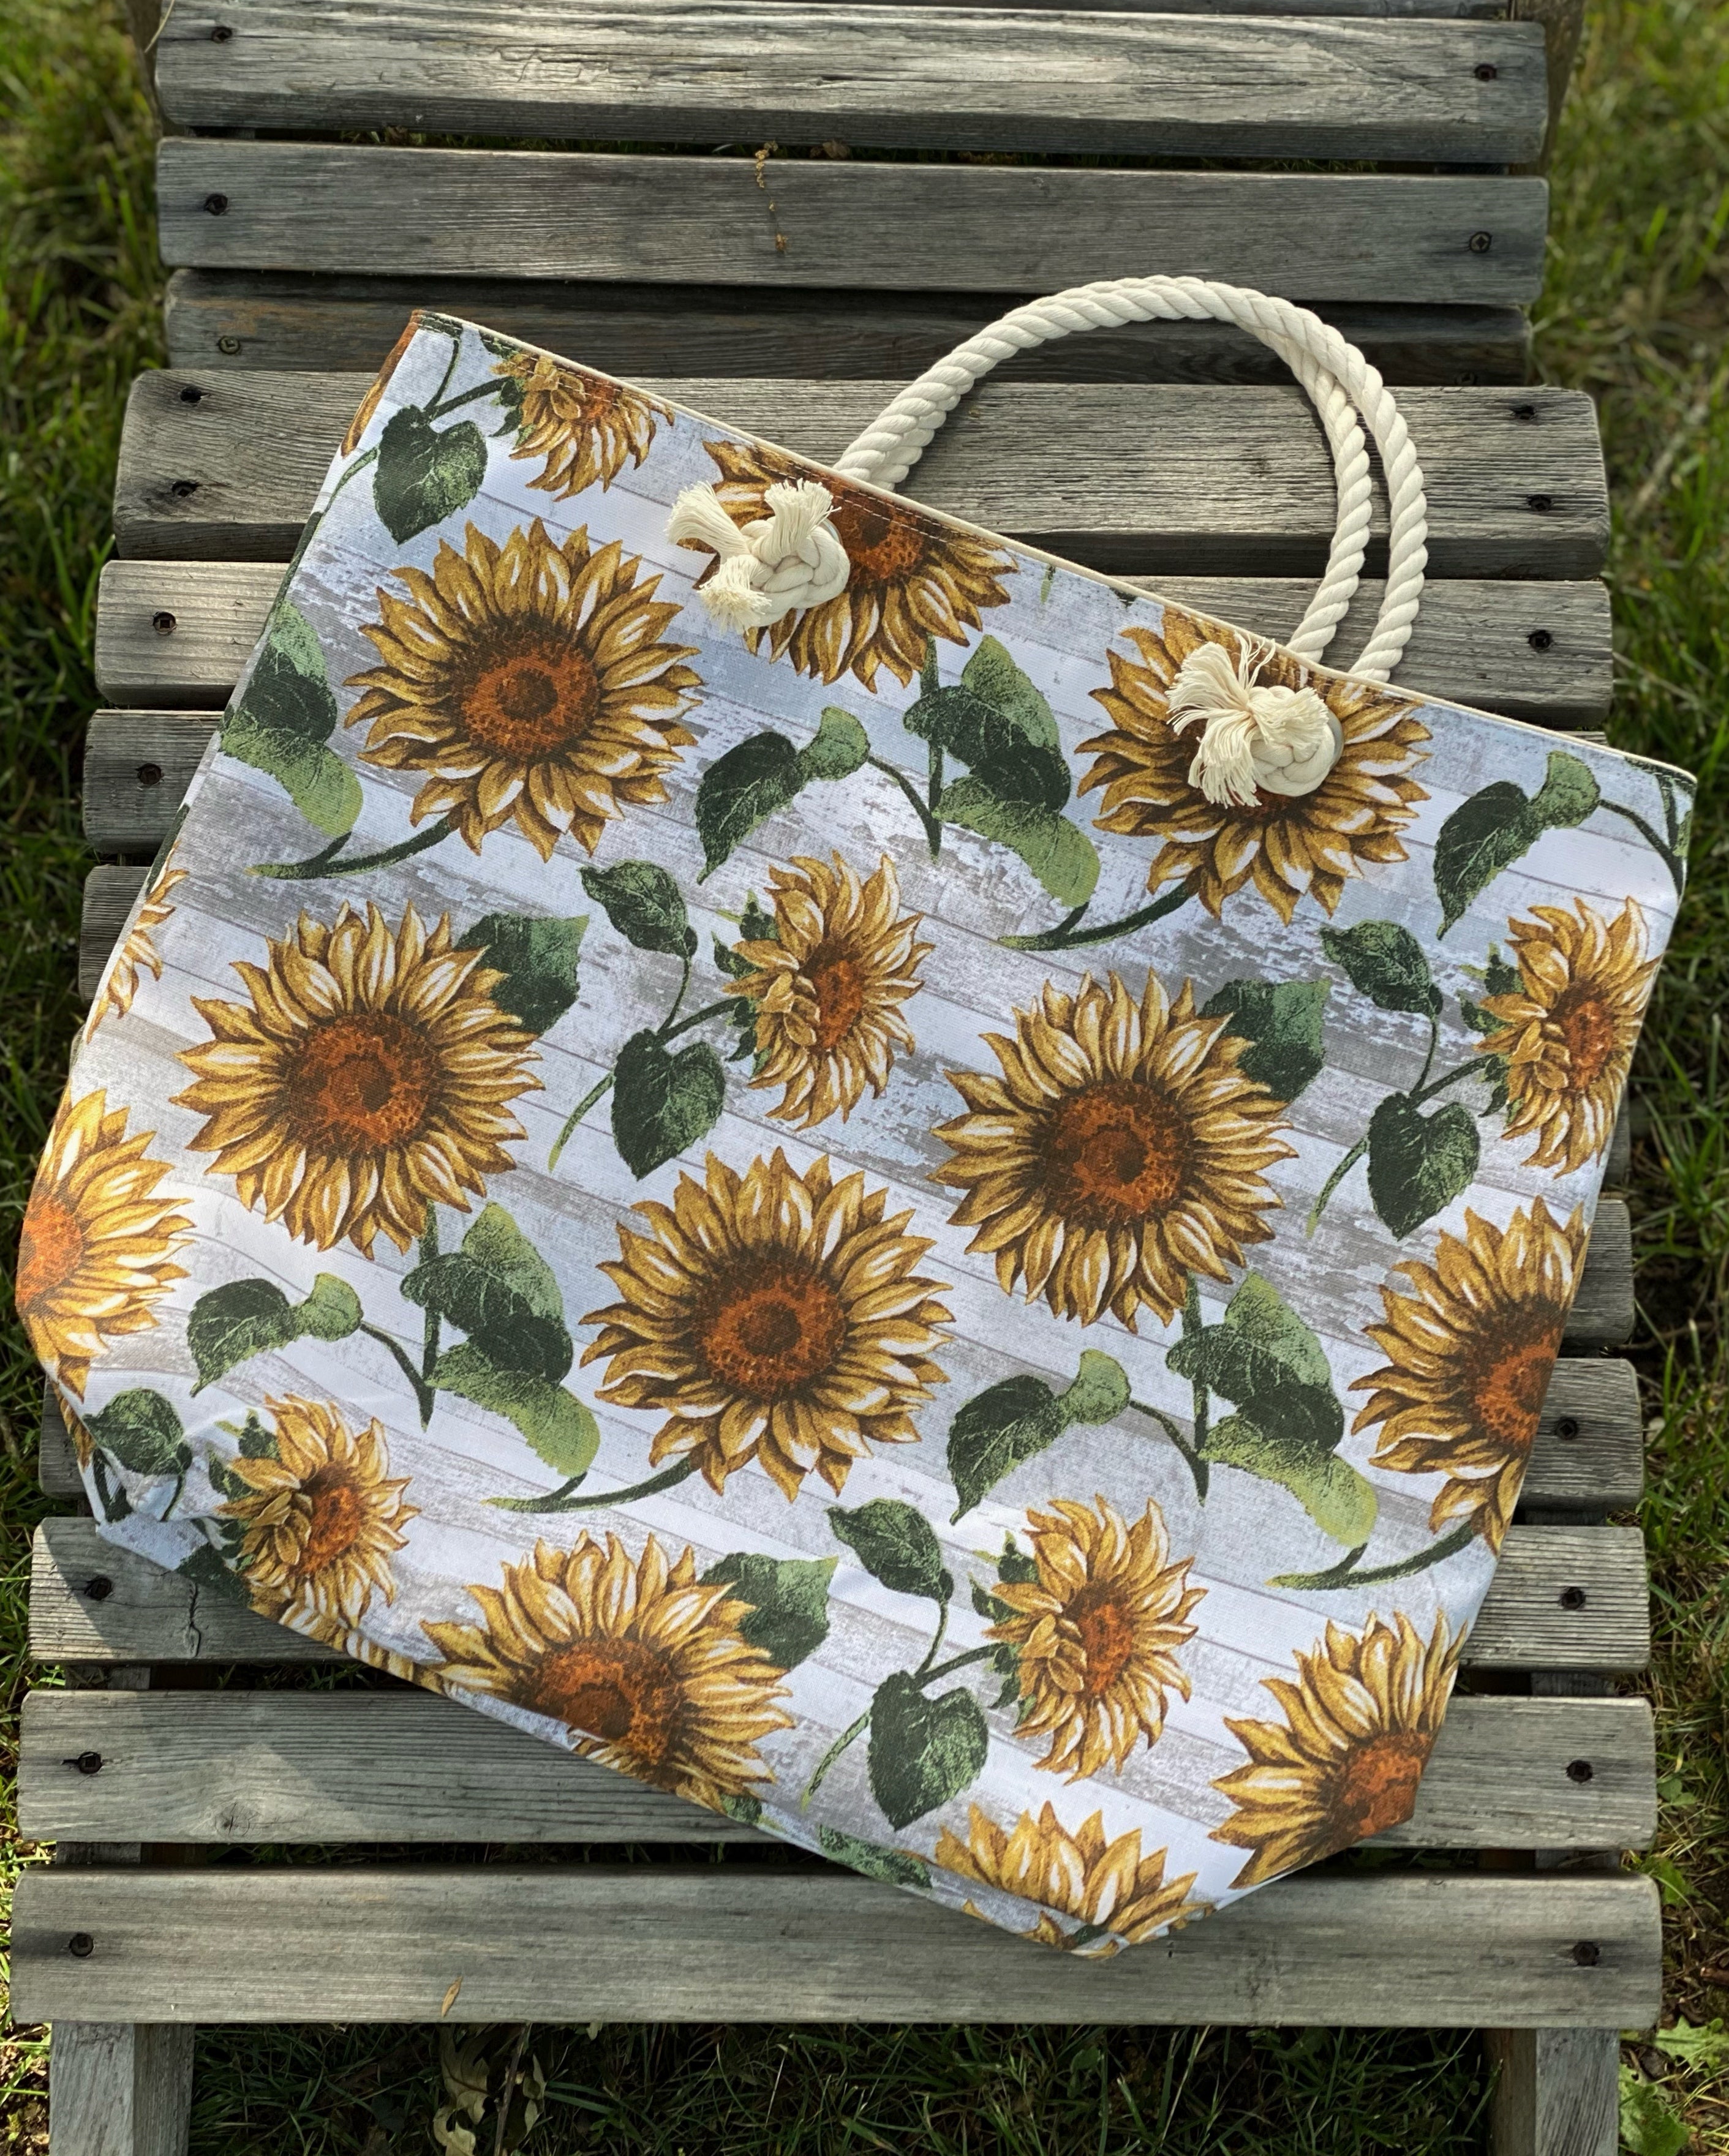 Sunflower on Wood Beach Tote with Rope Handles, Tote Bag, Beach Bag, Reusable Grocery Tote, Farmers Market Bag